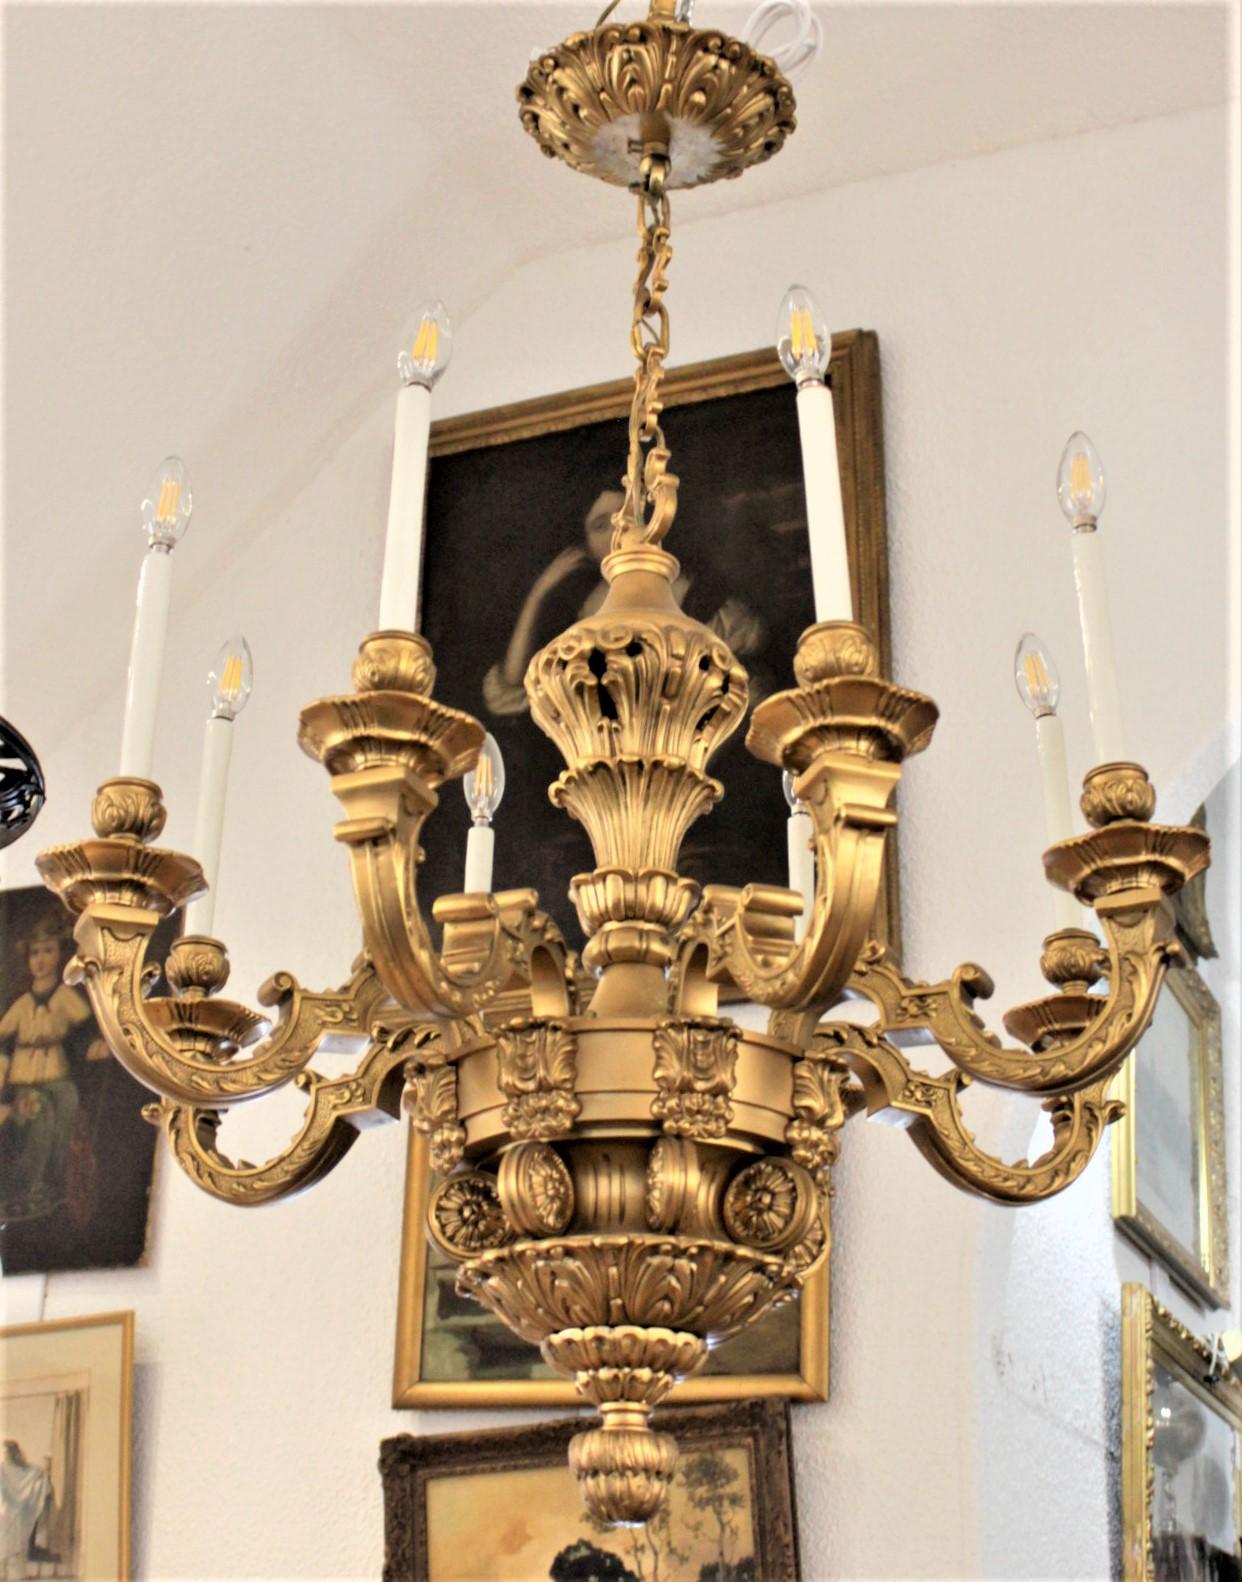 This very large and substantial cast and gilt bronze eight-arm chandelier was made in France in approximately 1900 in the Louis XIV style. The ornate and very heavy casting is decorated with stylized leaves and scrollwork from the original ceiling